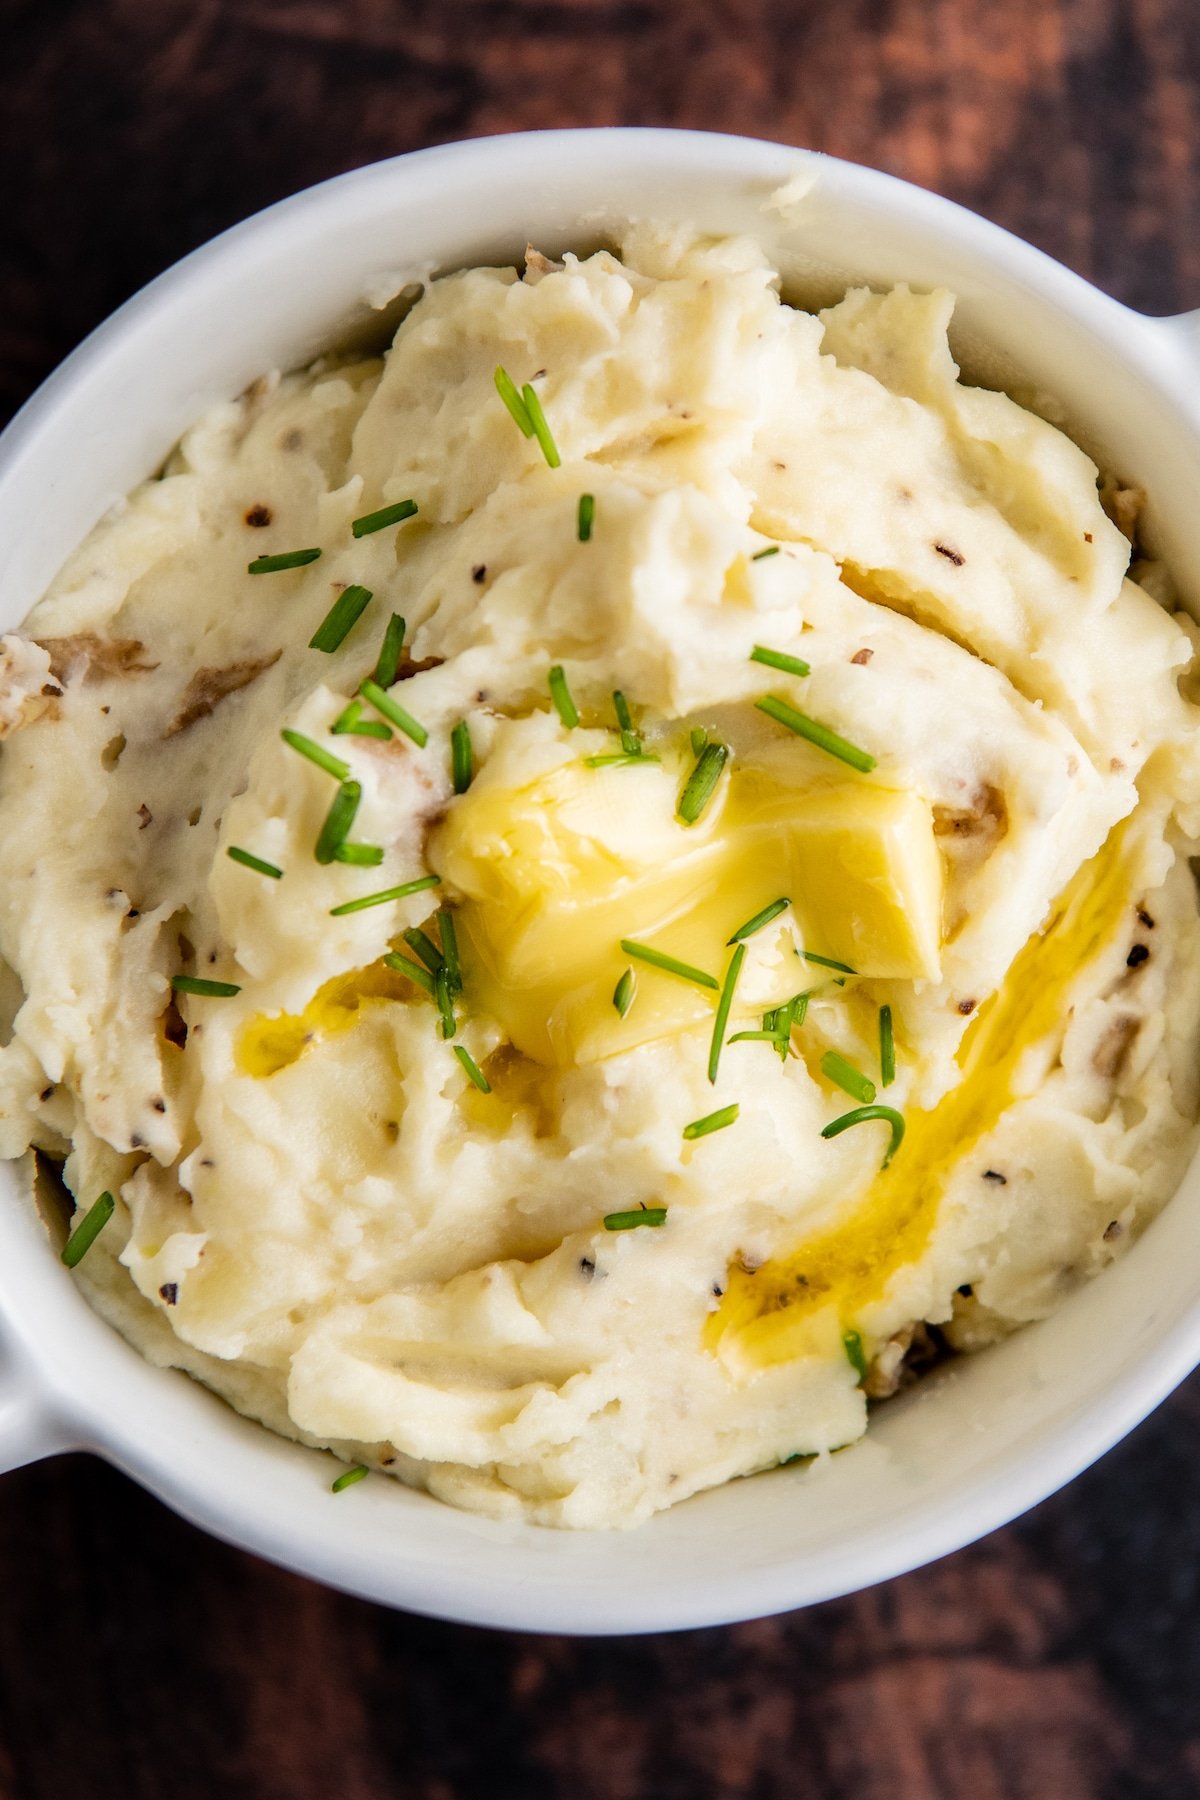 Sour Cream mashed potatoes in a bowl with melted butter and chives on top.